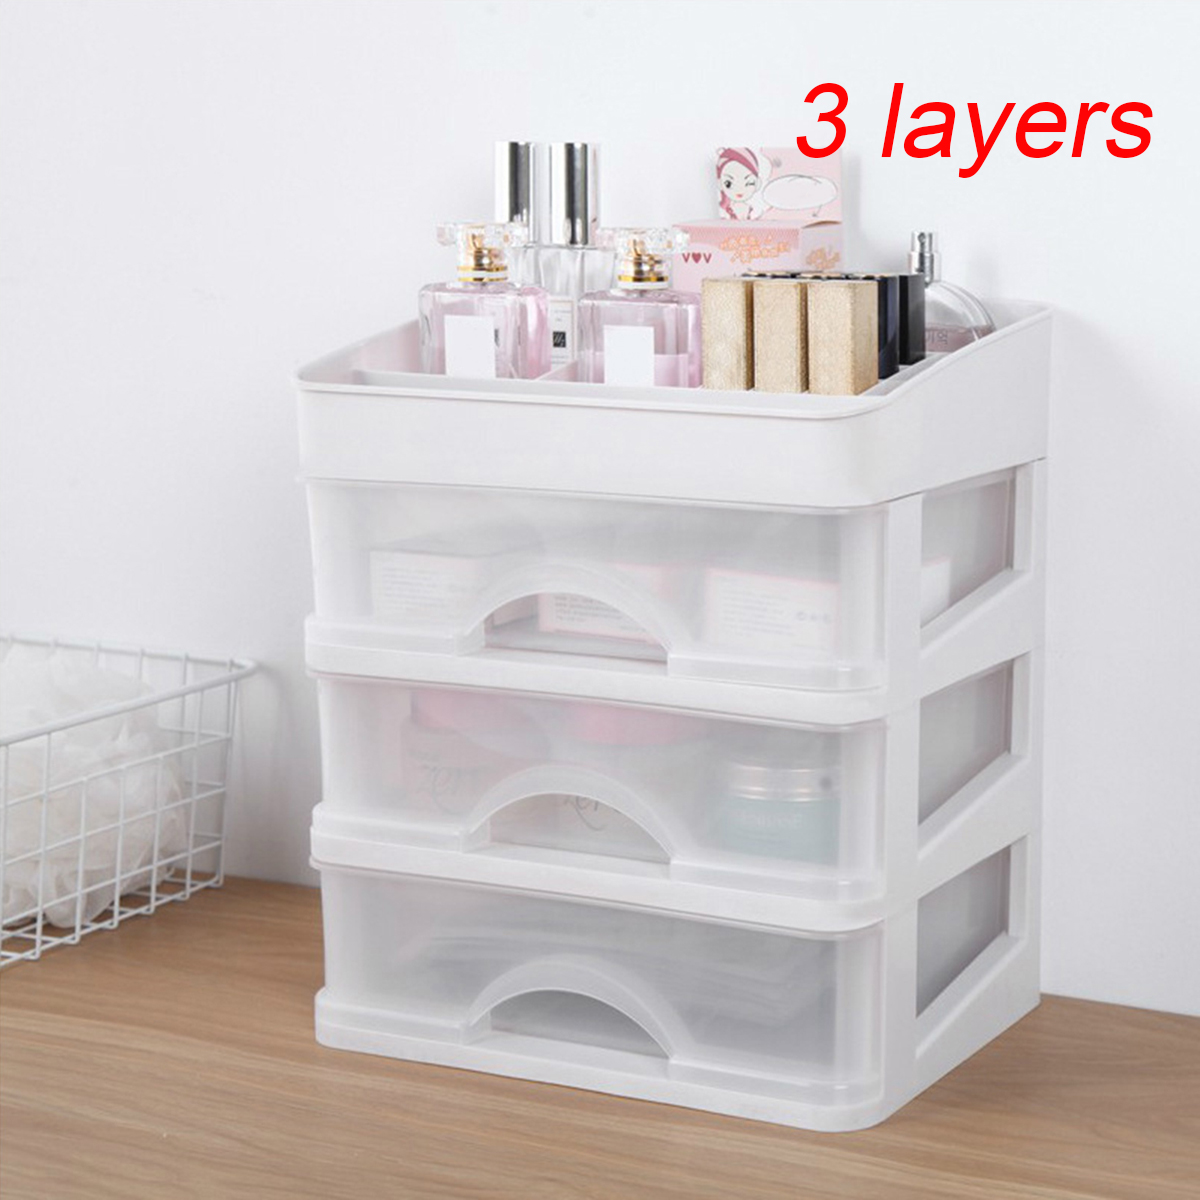 Plastic-Cosmetic-Drawer-Makeup-Organizer-Storage-Box-Container-Holder-Desktop-with-Drawer-1708816-6